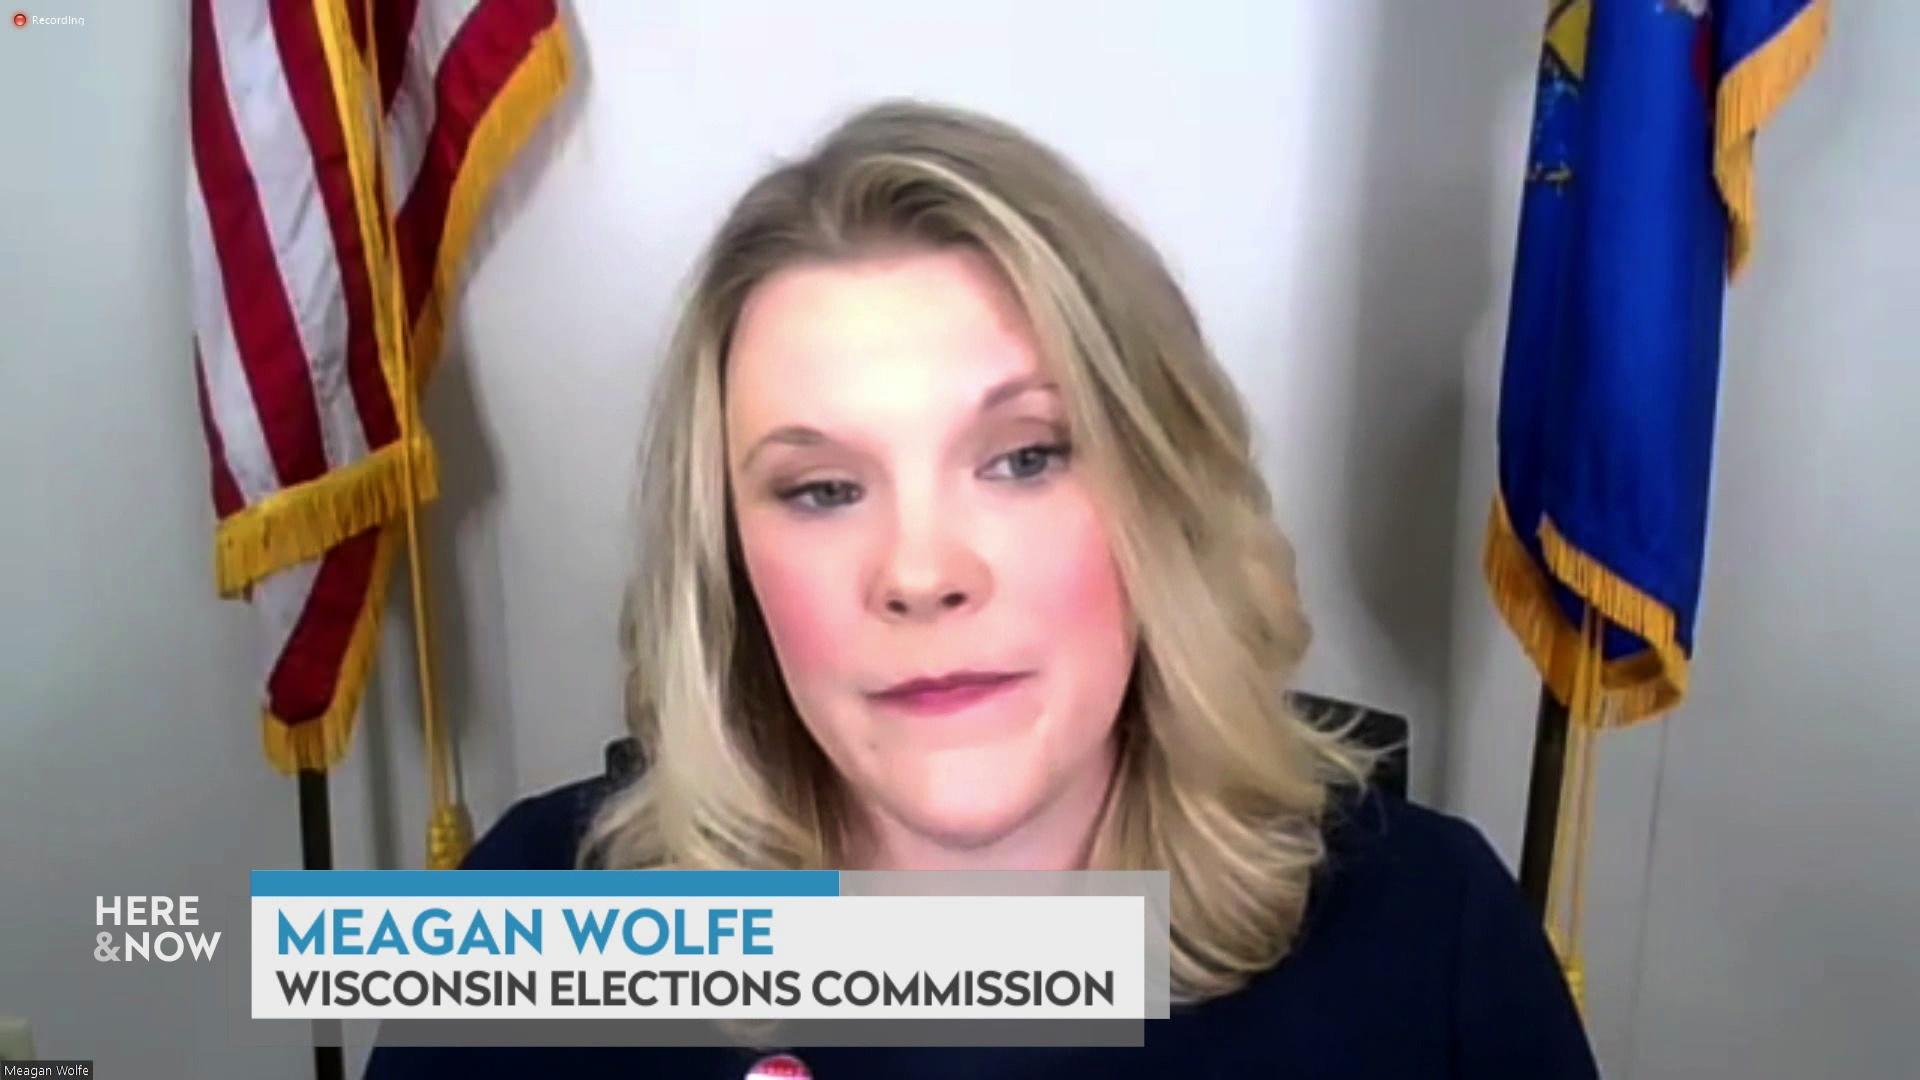 The Wisconsin Elections Commission responds to fraud charges